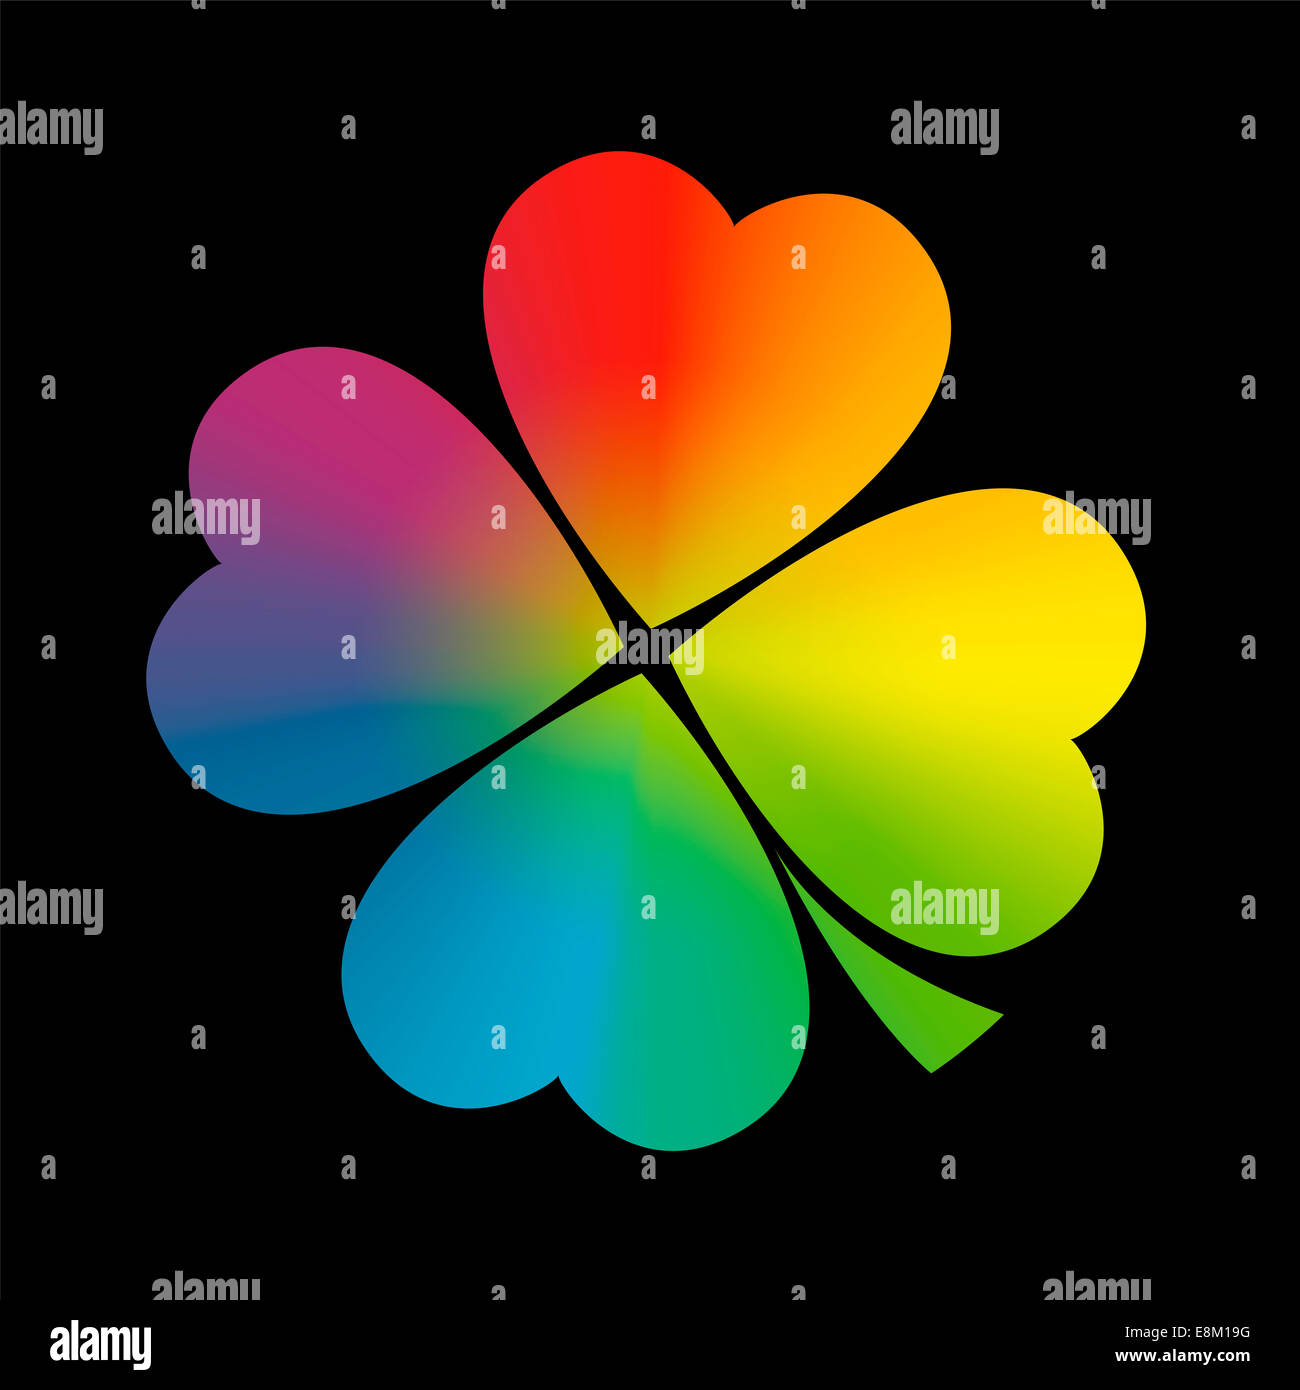 Four leaved cloverleaf with circular rainbow gradient coloring. Stock Photo